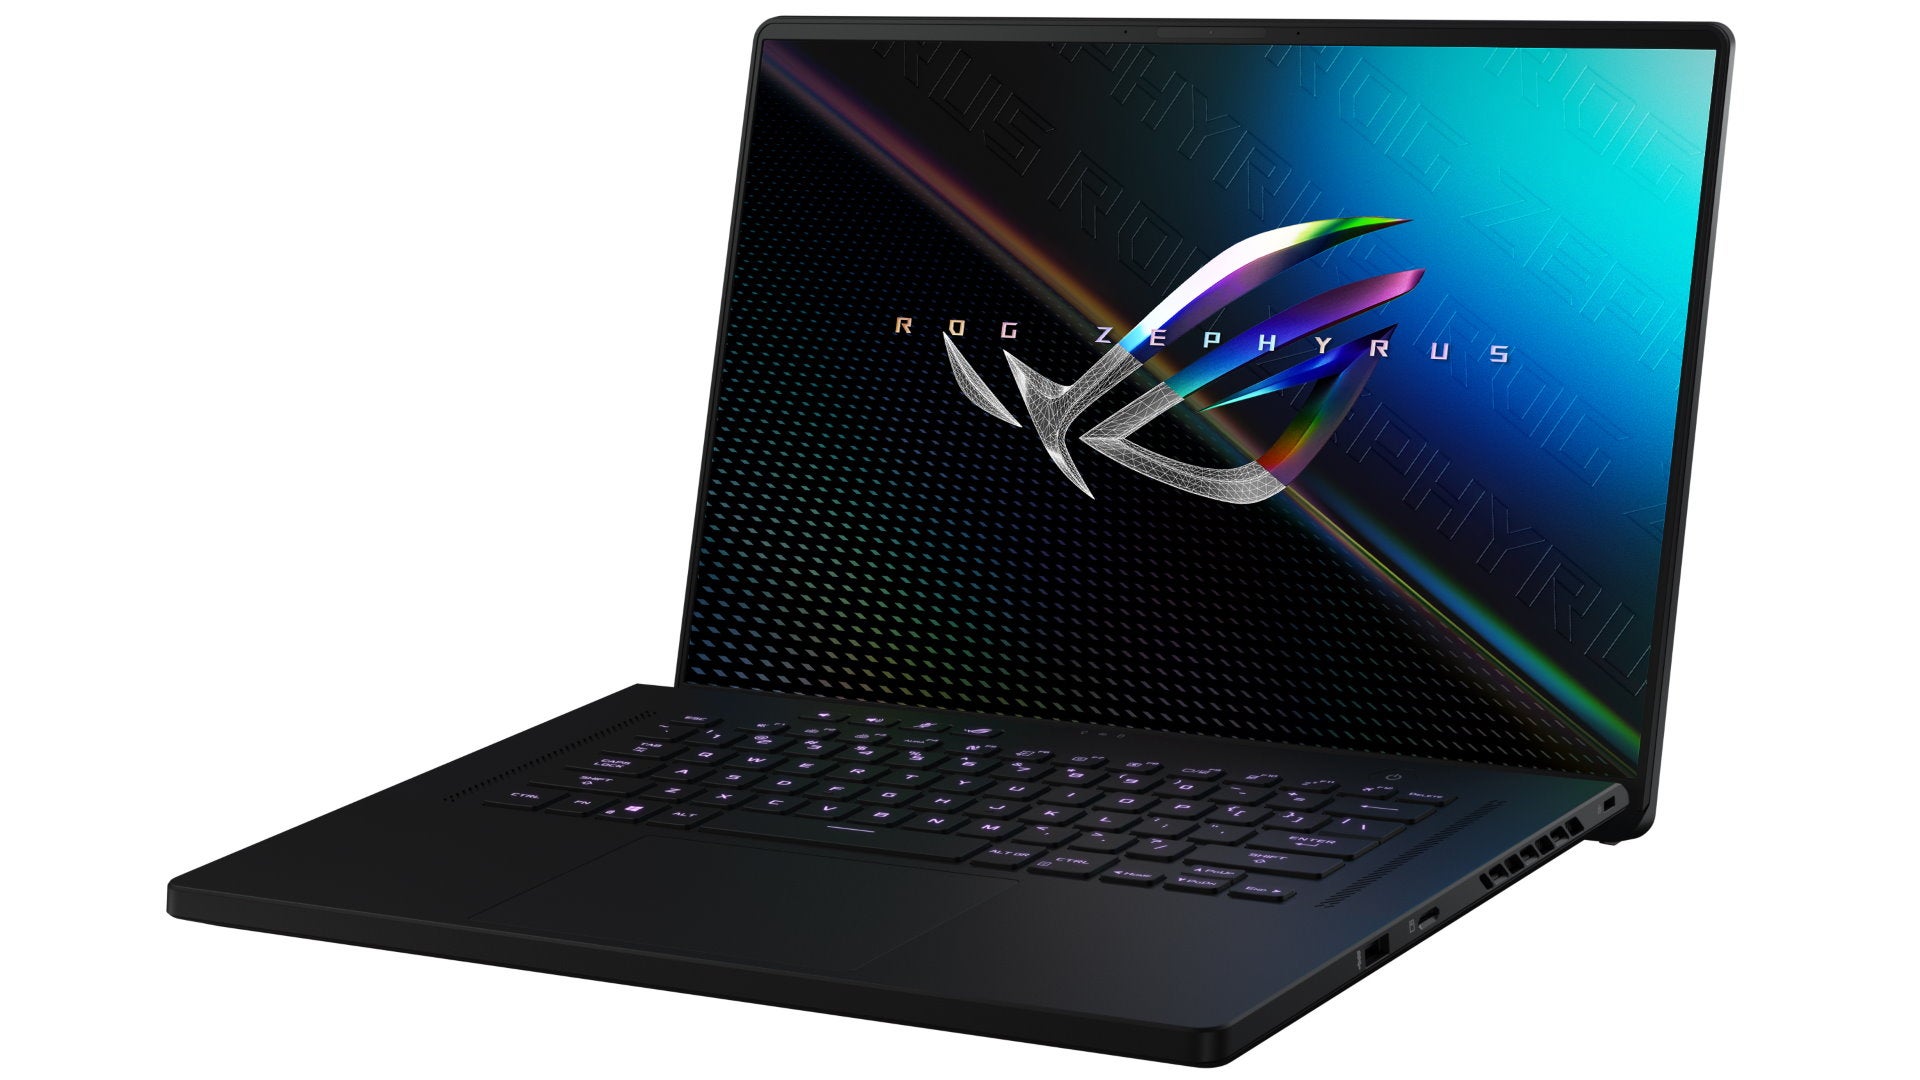 A photo of the Asus ROG Zephyrus M16 gaming laptop